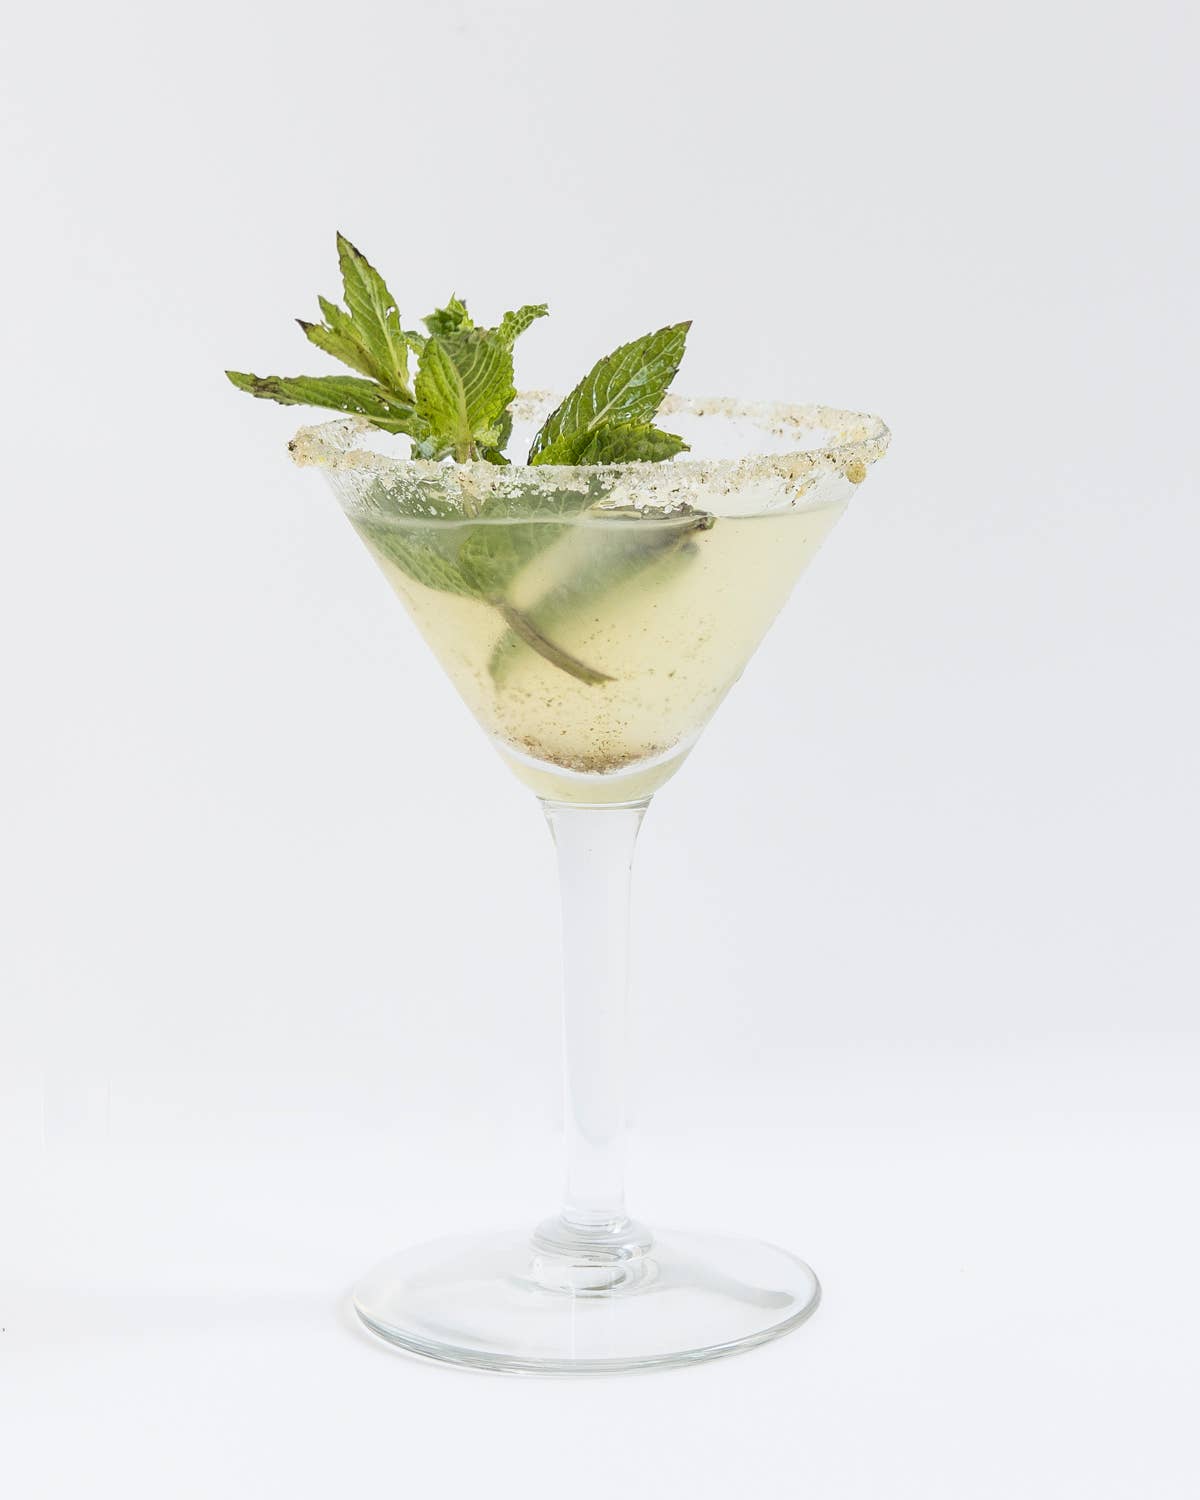 The Verbena and Mint Cocktail